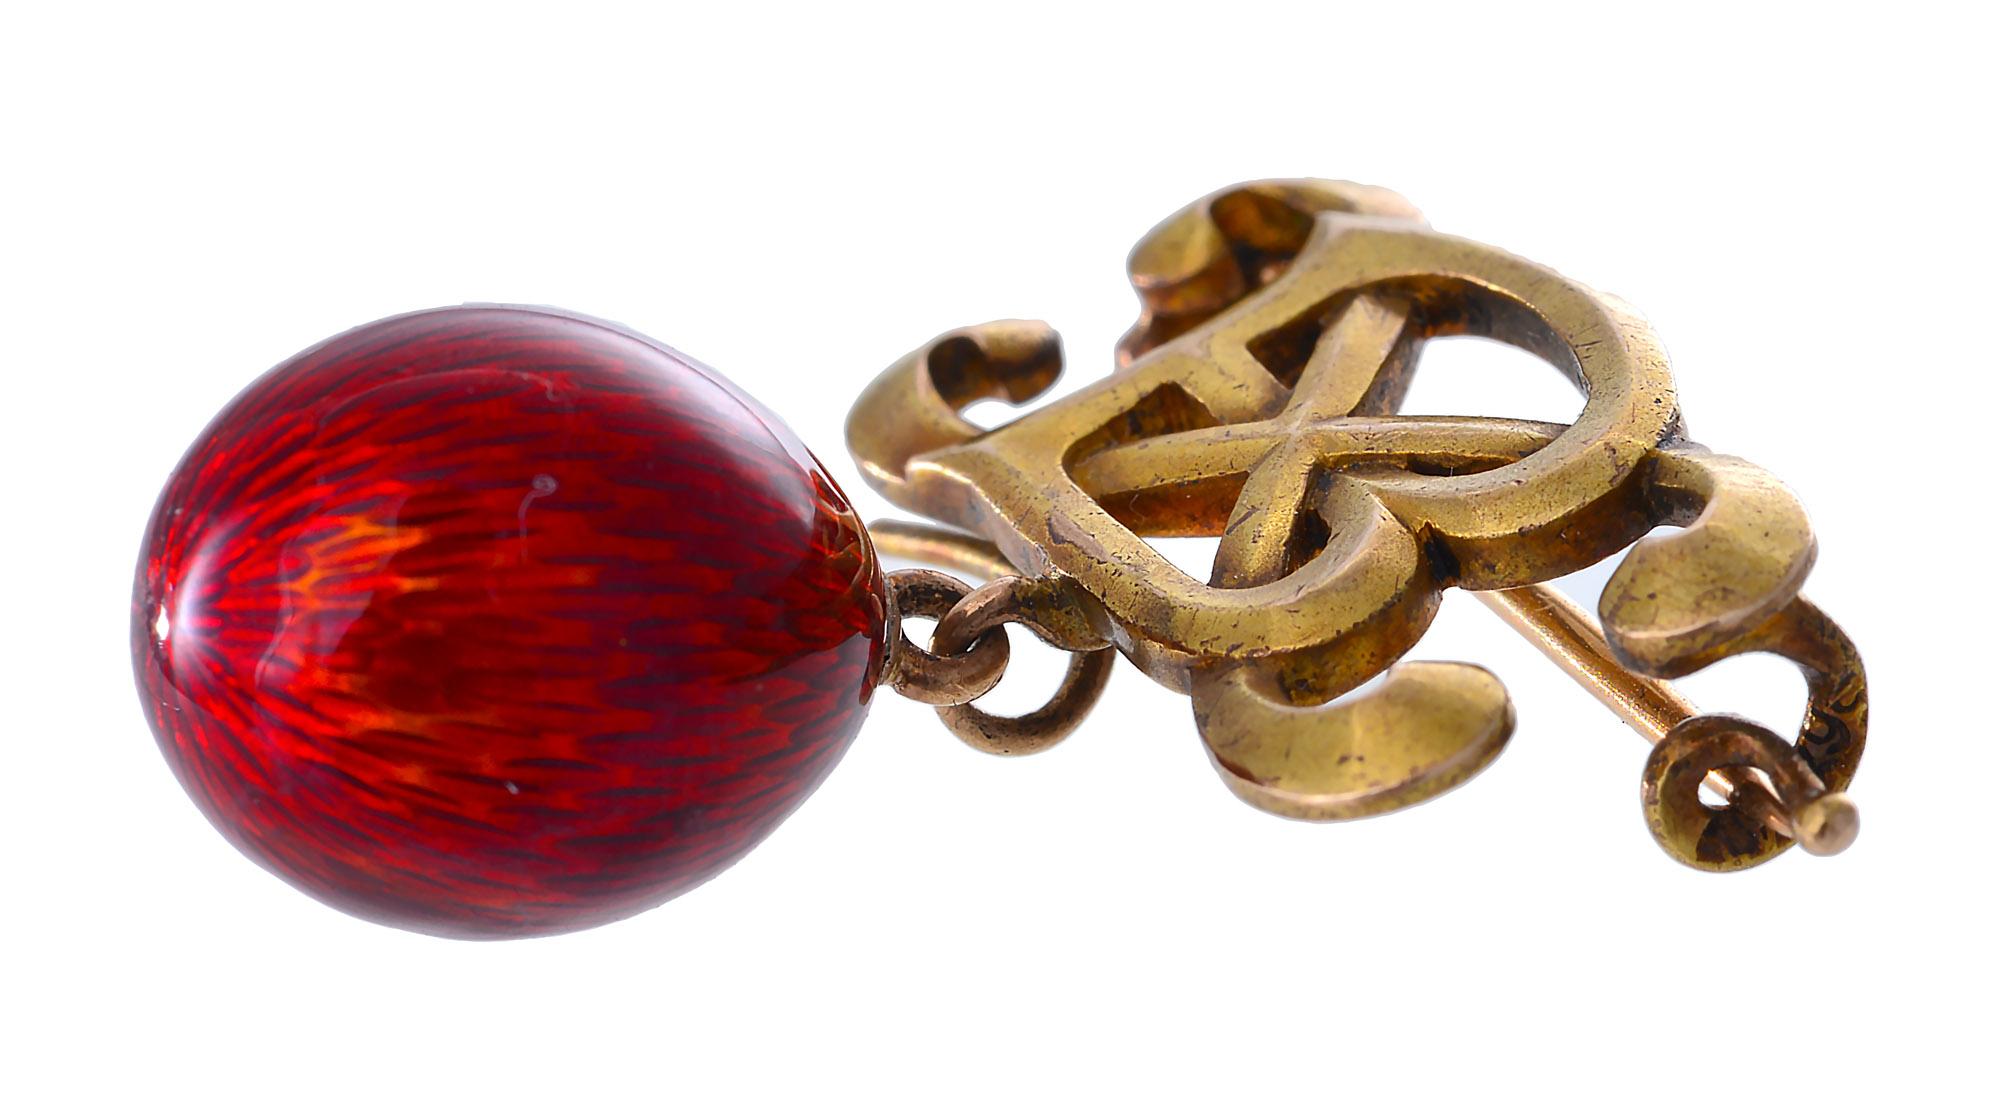 A brooch of a gold cyrillic letters depicting the message 'Christ Is Risen' suspending a small red Cloisonné enamel egg. The brooch has a makers mark attributed to the Faberge jeweller Alfred Thielmann. The brooch is marked on the clasp A.T and the